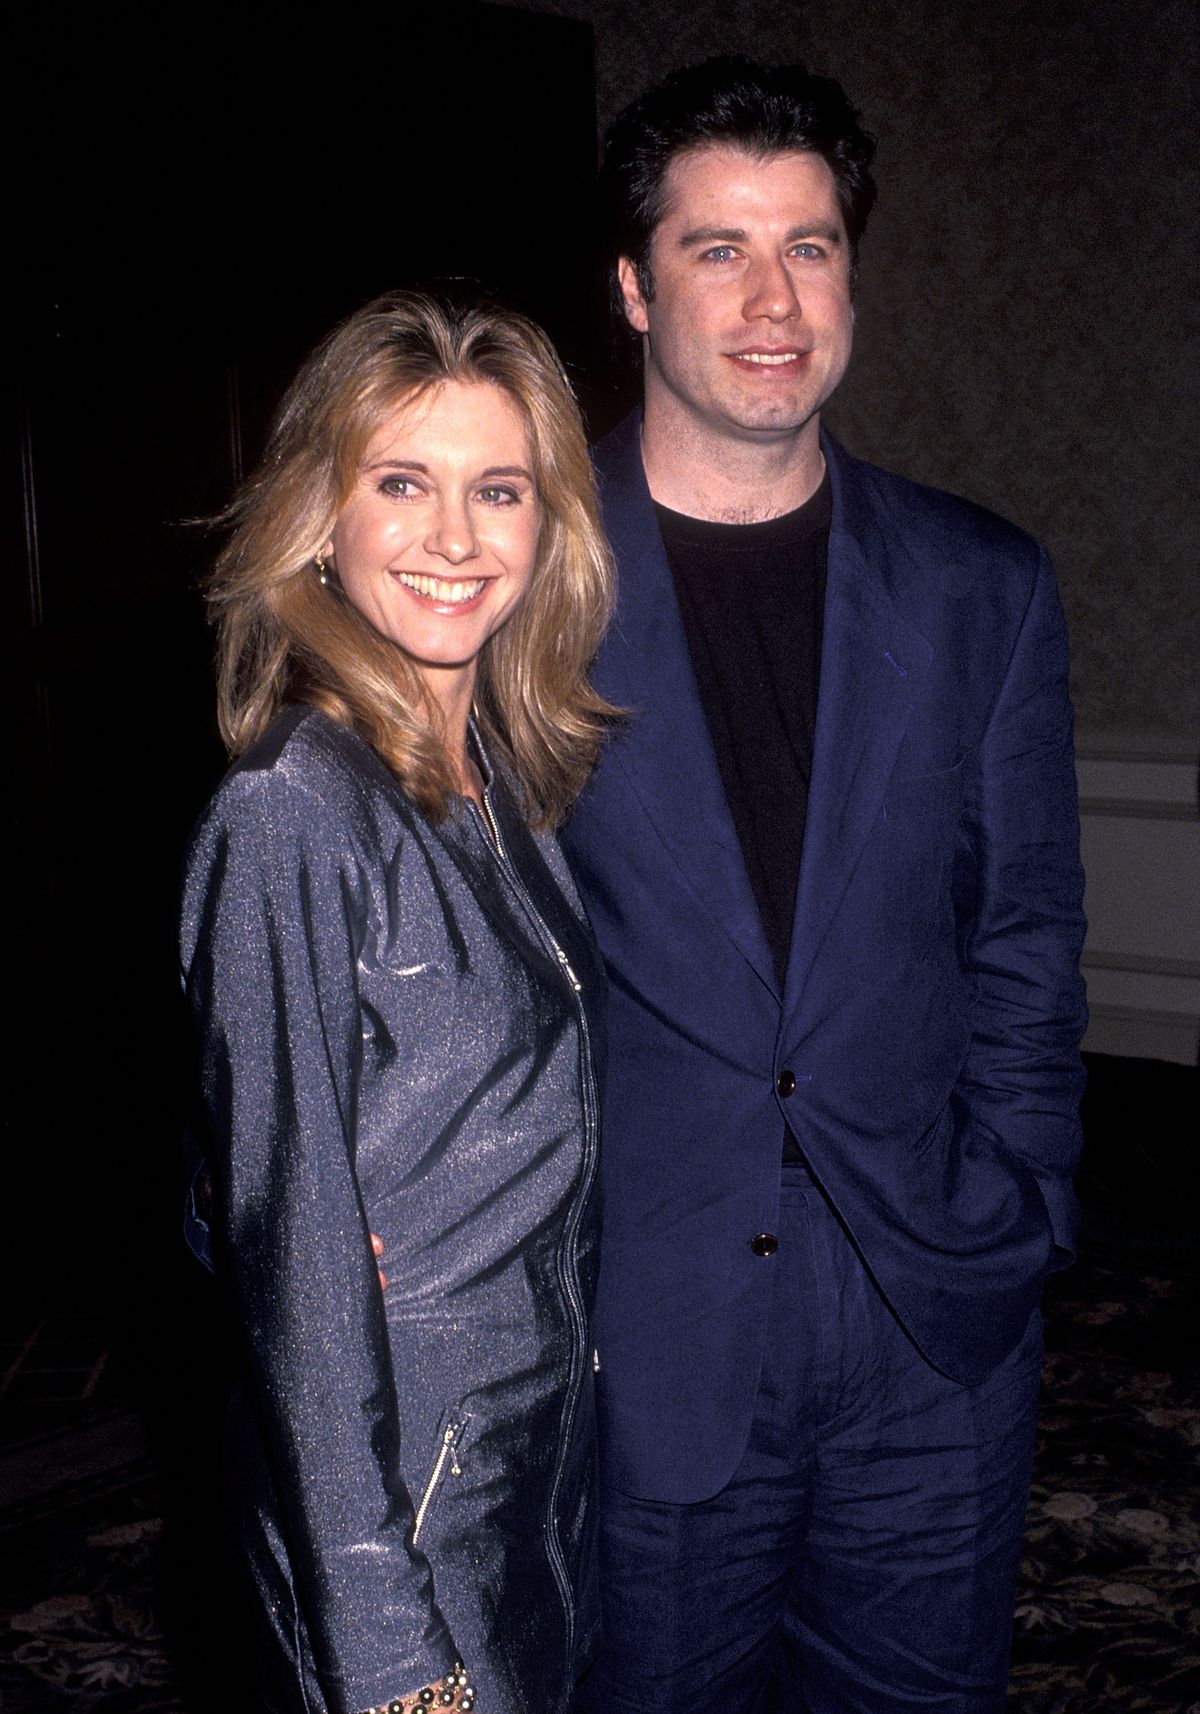 universal city, ca   february 15   singeractress olivia newton john and actor john travolta attend the grease original theatre productions 20th anniversary celebration on february 15, 1992 at sheraton universal hotel in universal city, california photo by ron galella, ltdron galella collection via getty images